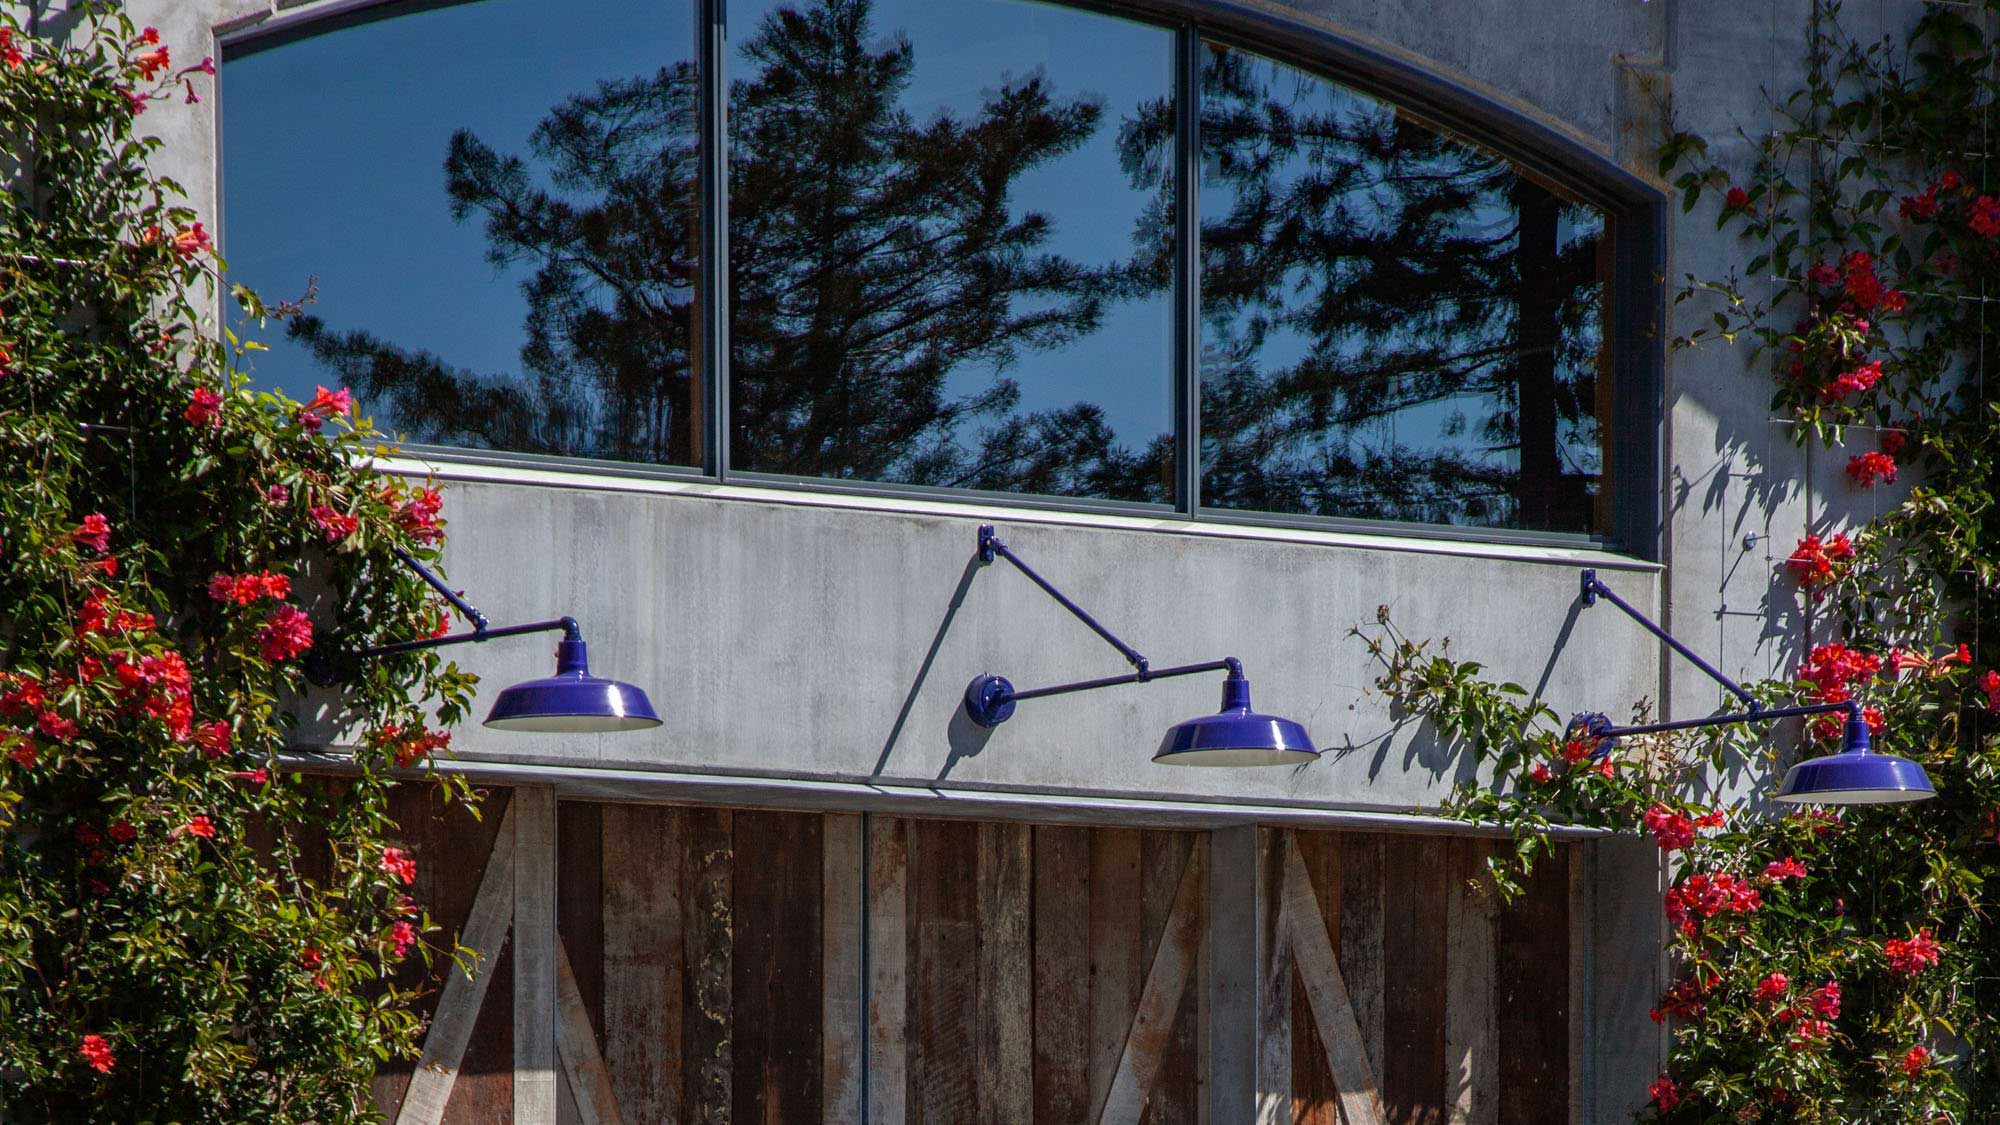 Close-up of 3 purple light fixtures over entrance to barn, wooden door beneath and large window above.